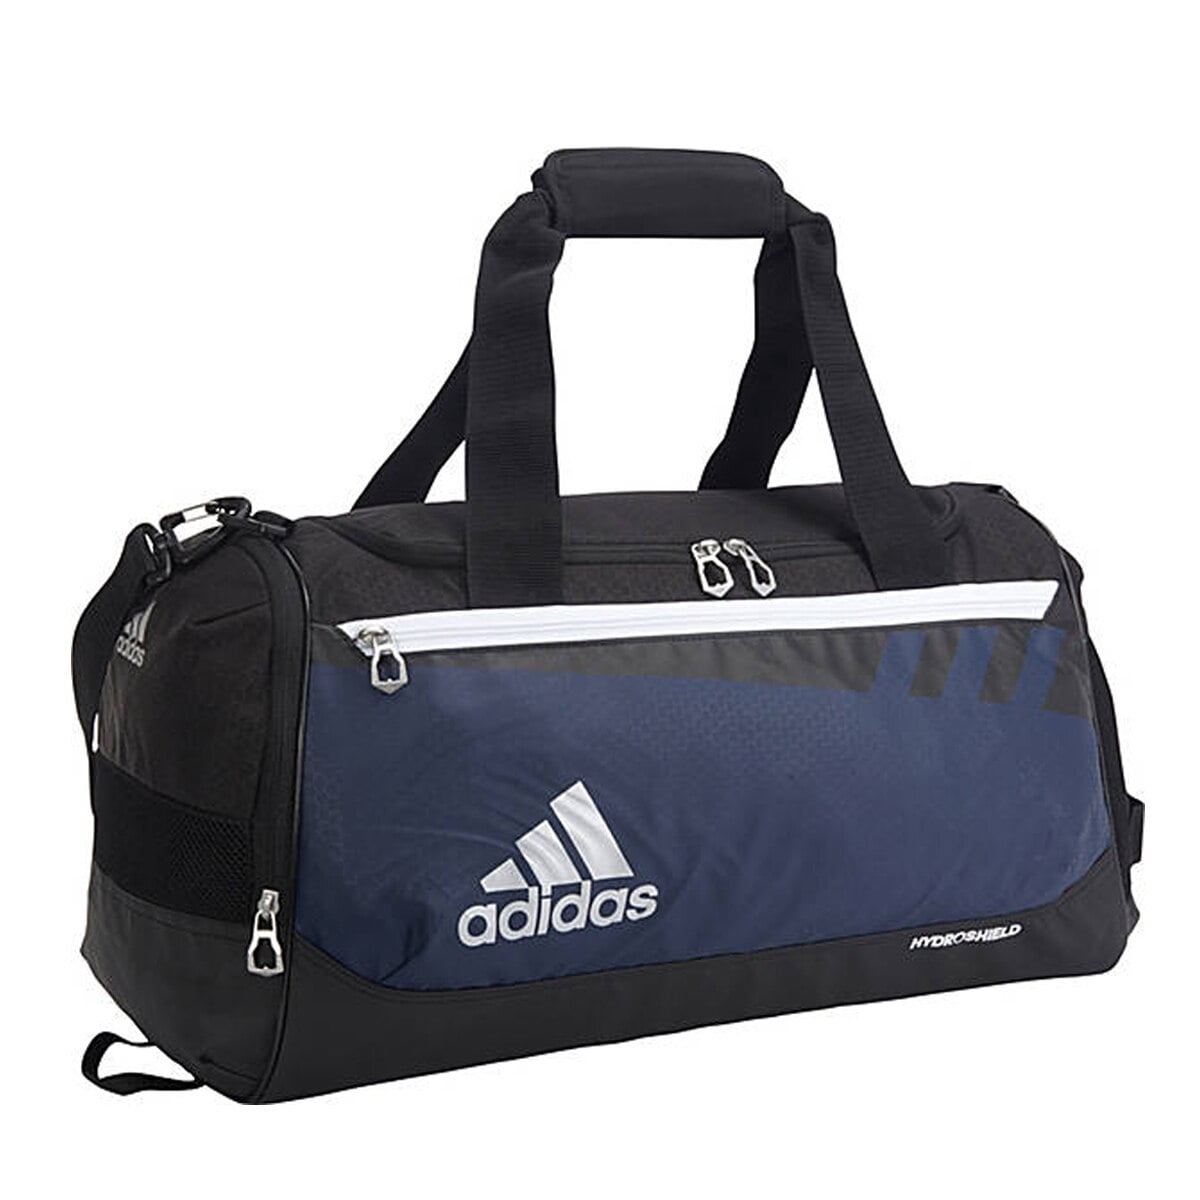 Adidas Issue Duffel Bag Various Colors -